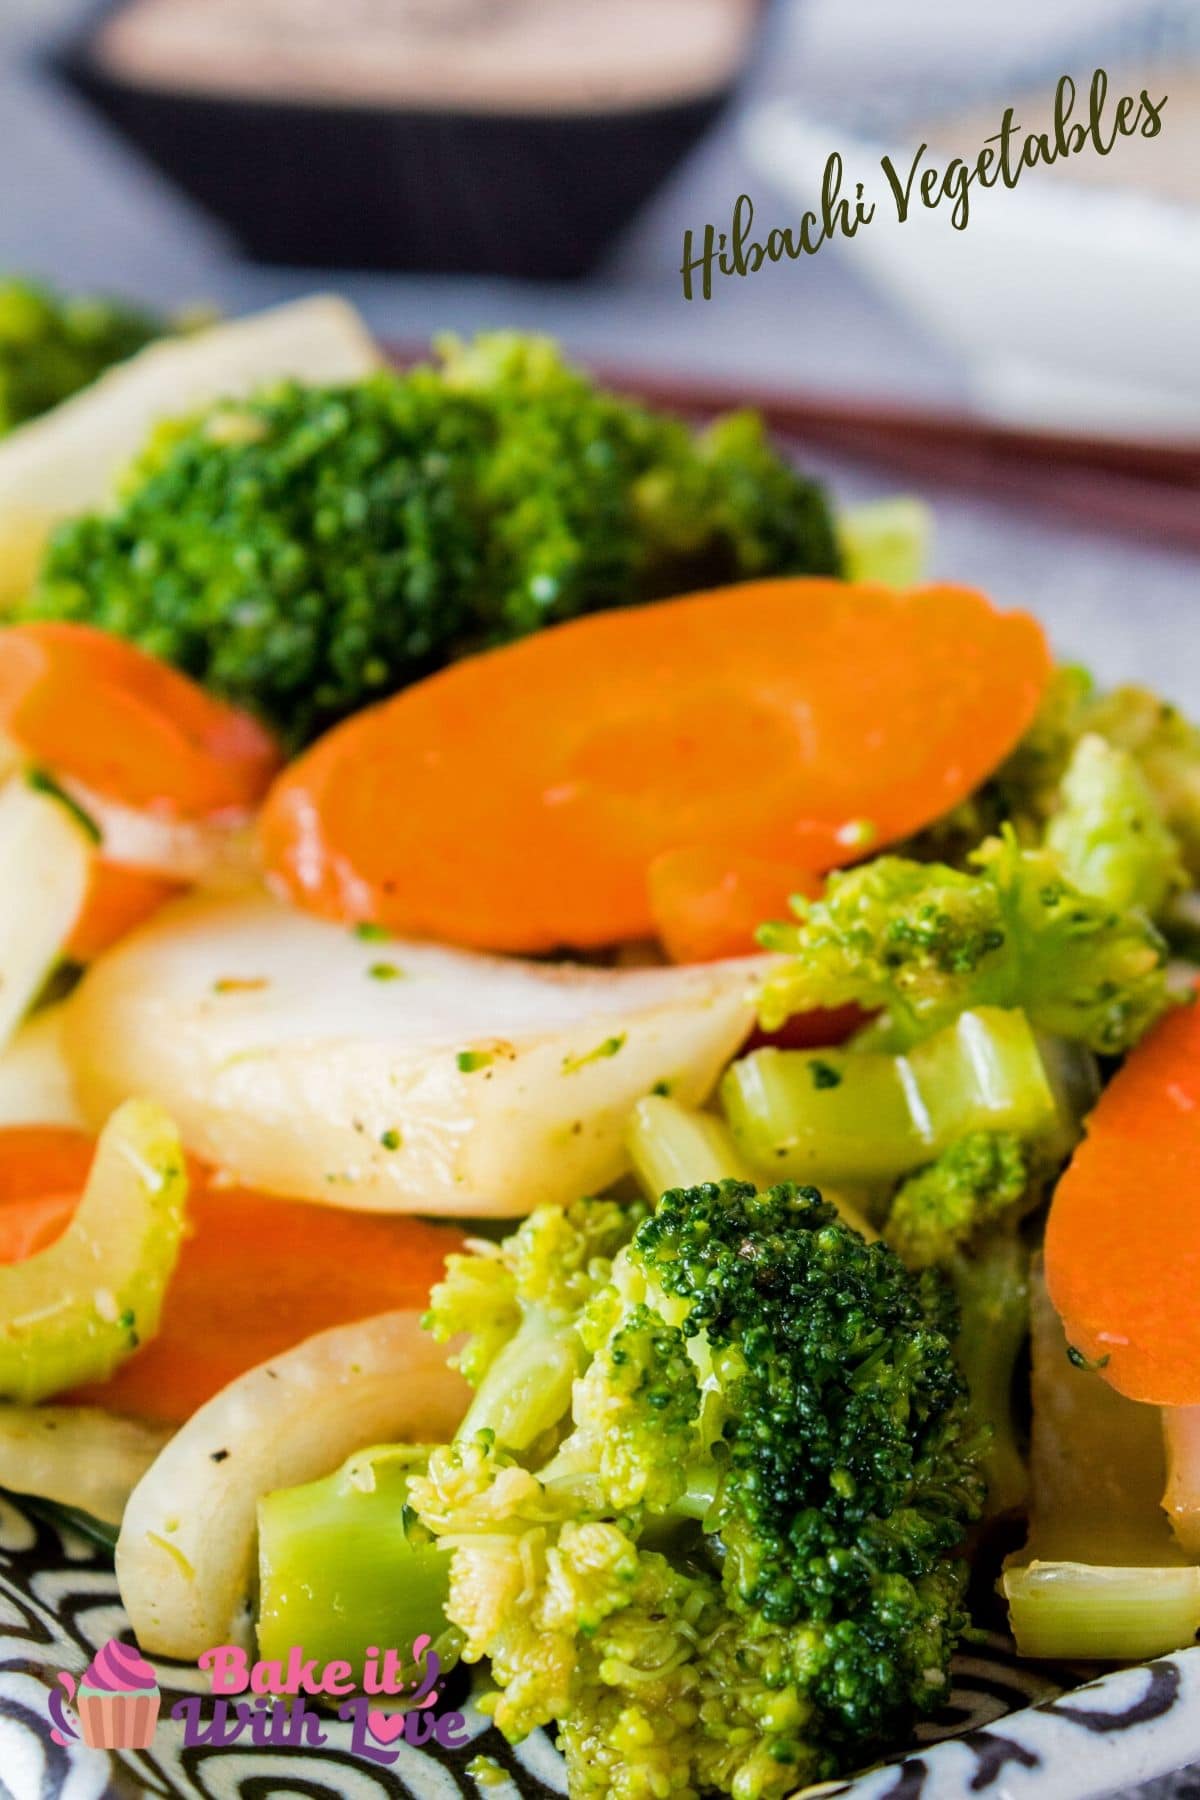 Delicious hibachi style seared vegetables are a great way to round out your hibachi dinner!!